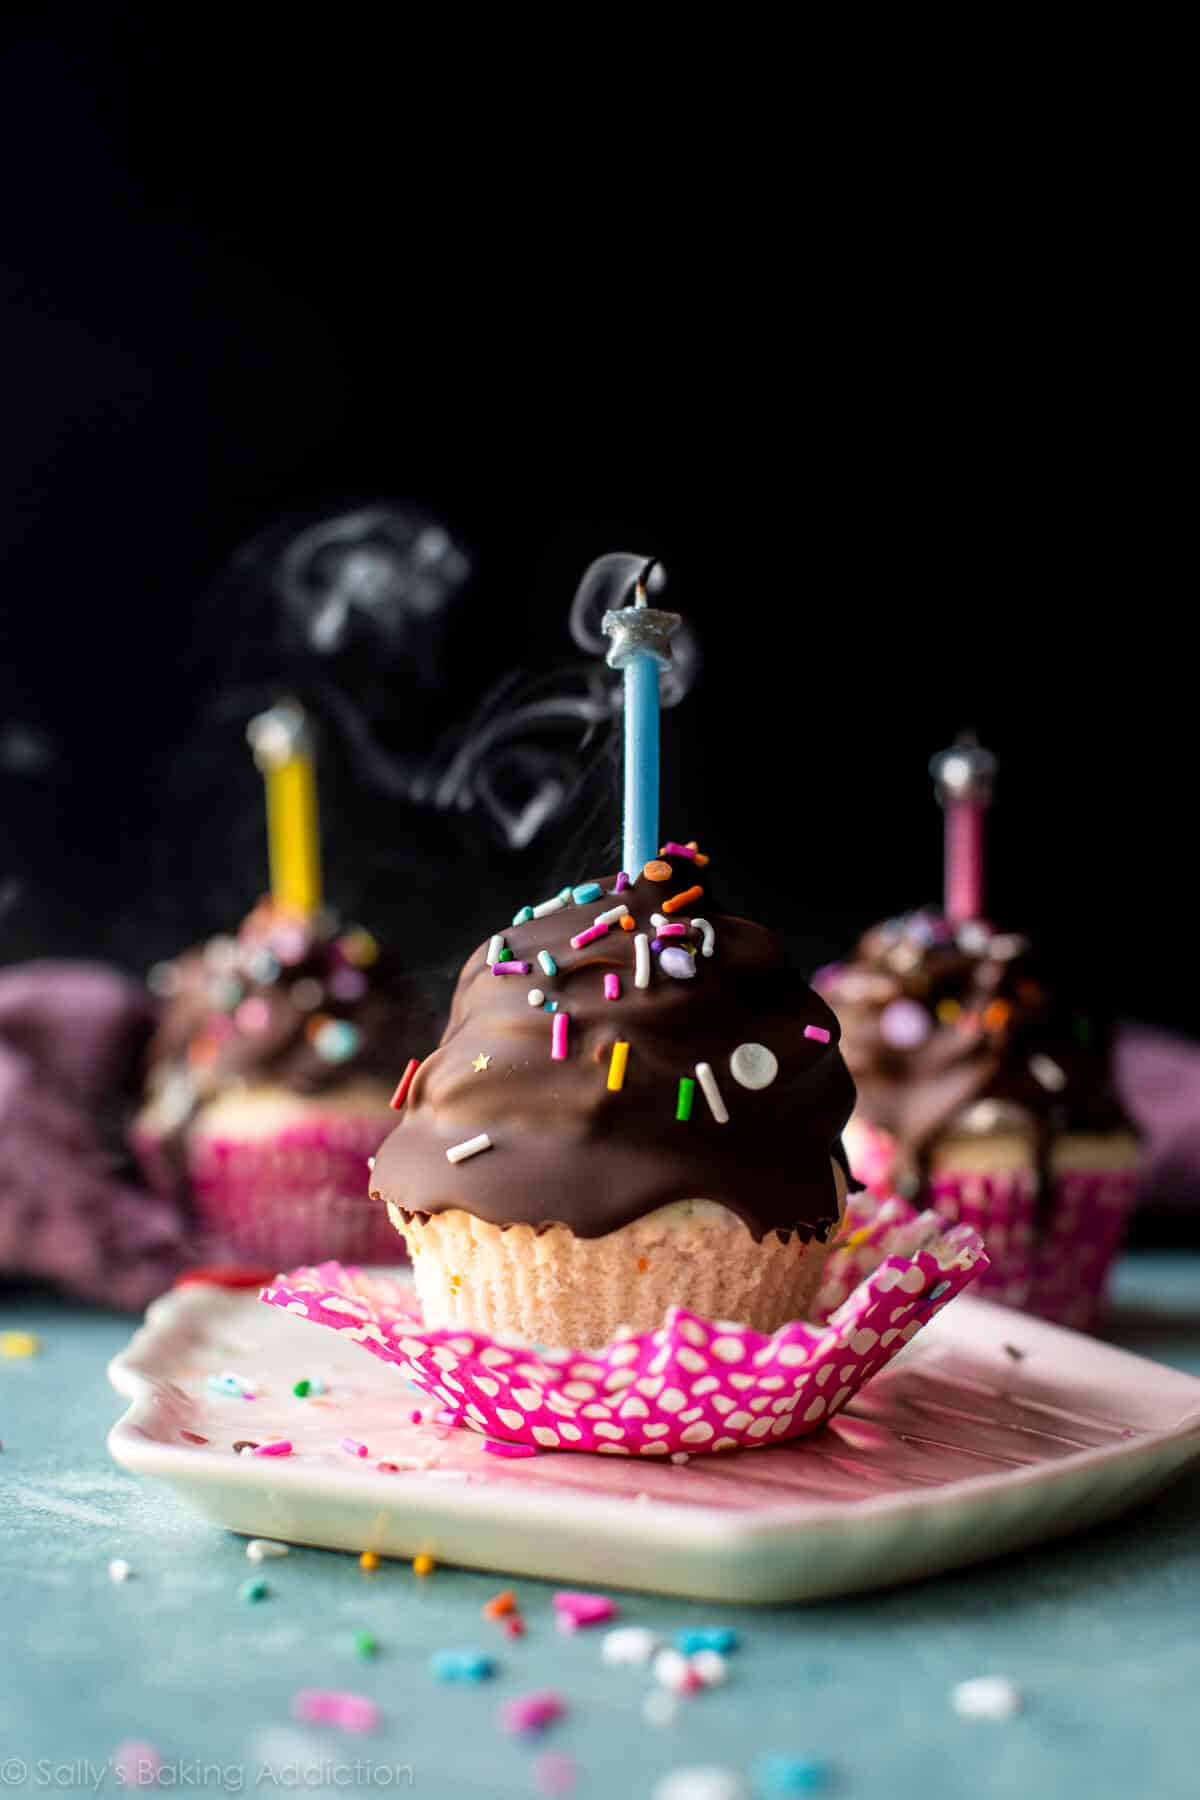 birthday cupcakes with chocolate coating and candles